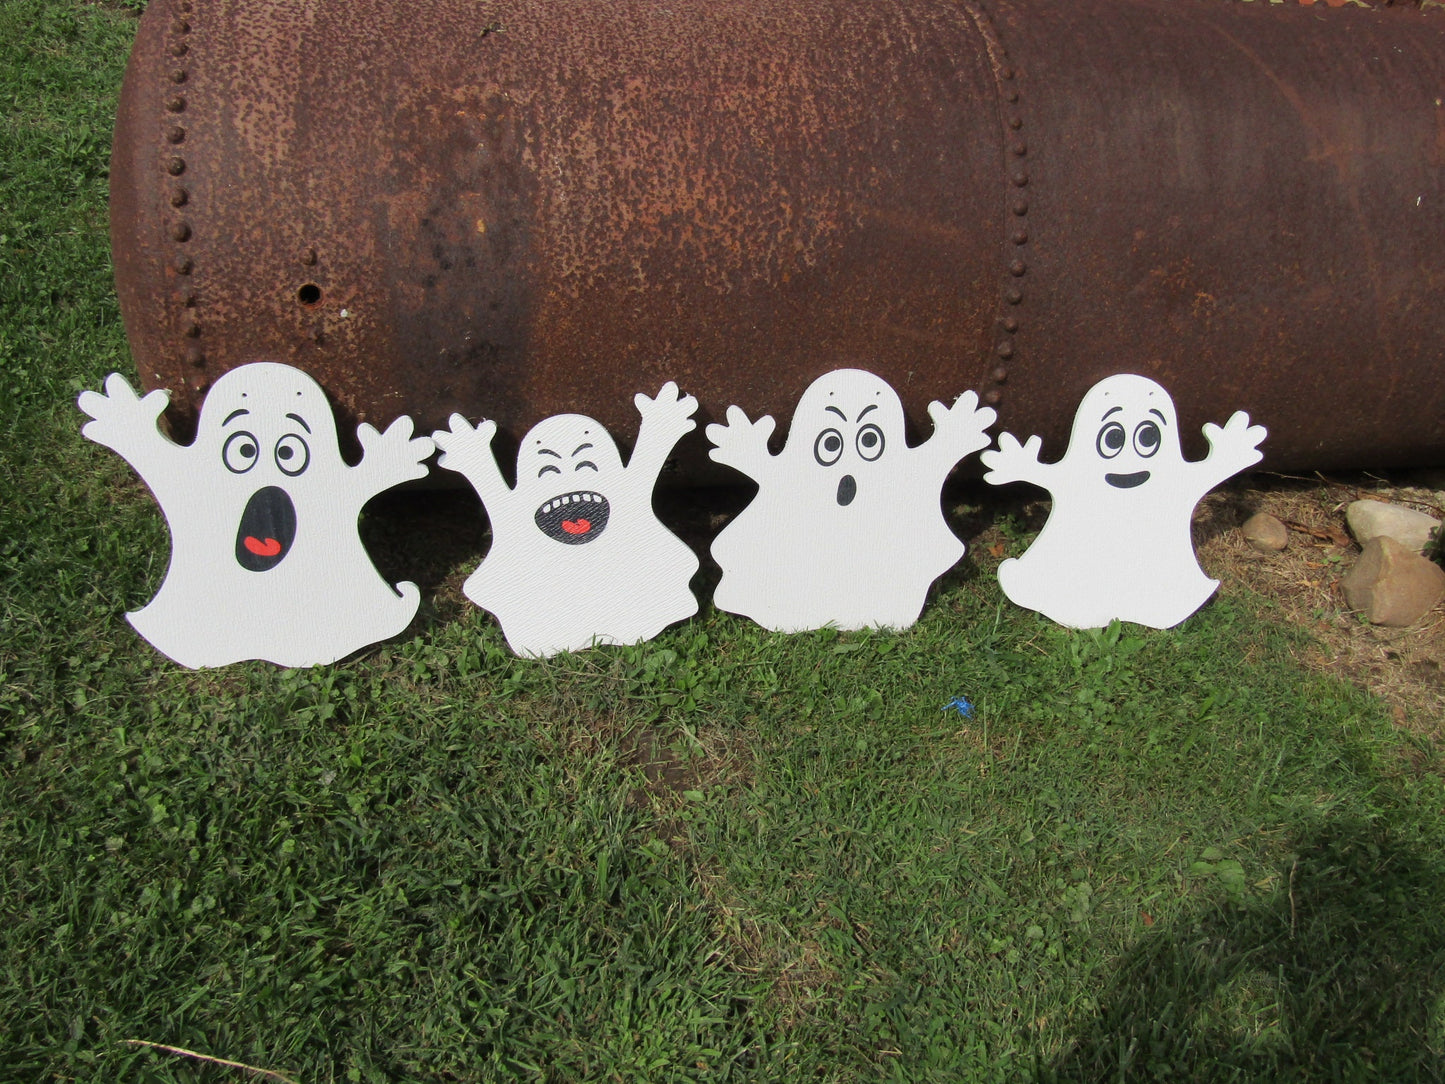 PVC All Weather Ghost Yard Decor Halloween Decoration Weather Proof Gastly Ghosts Set Of 4 Thick Fall Autumn Trick or Treat Spooky Fun